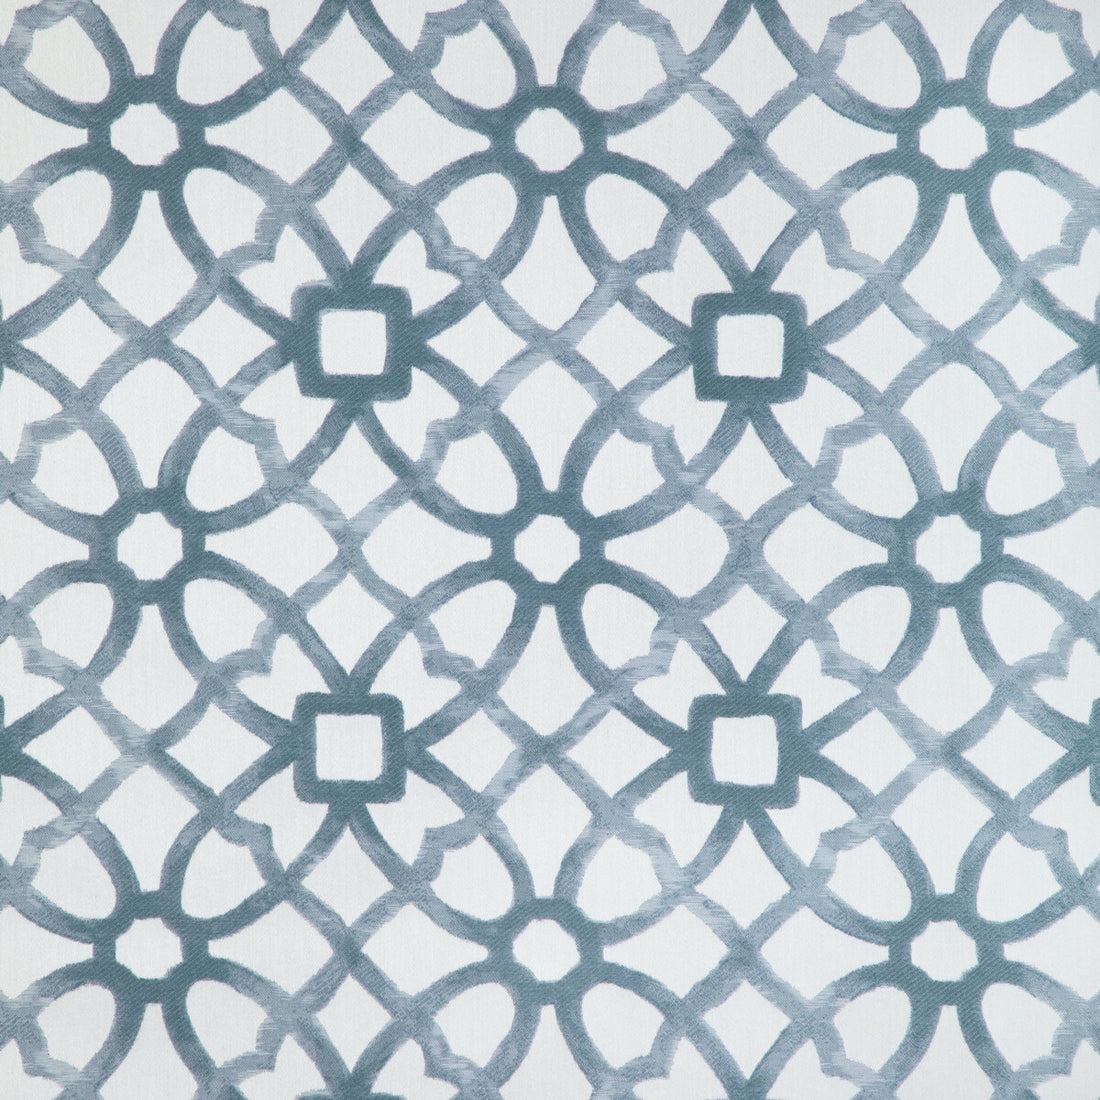 New Zuma fabric in sea color - pattern 36788.5.0 - by Kravet Design in the Candice Olson collection